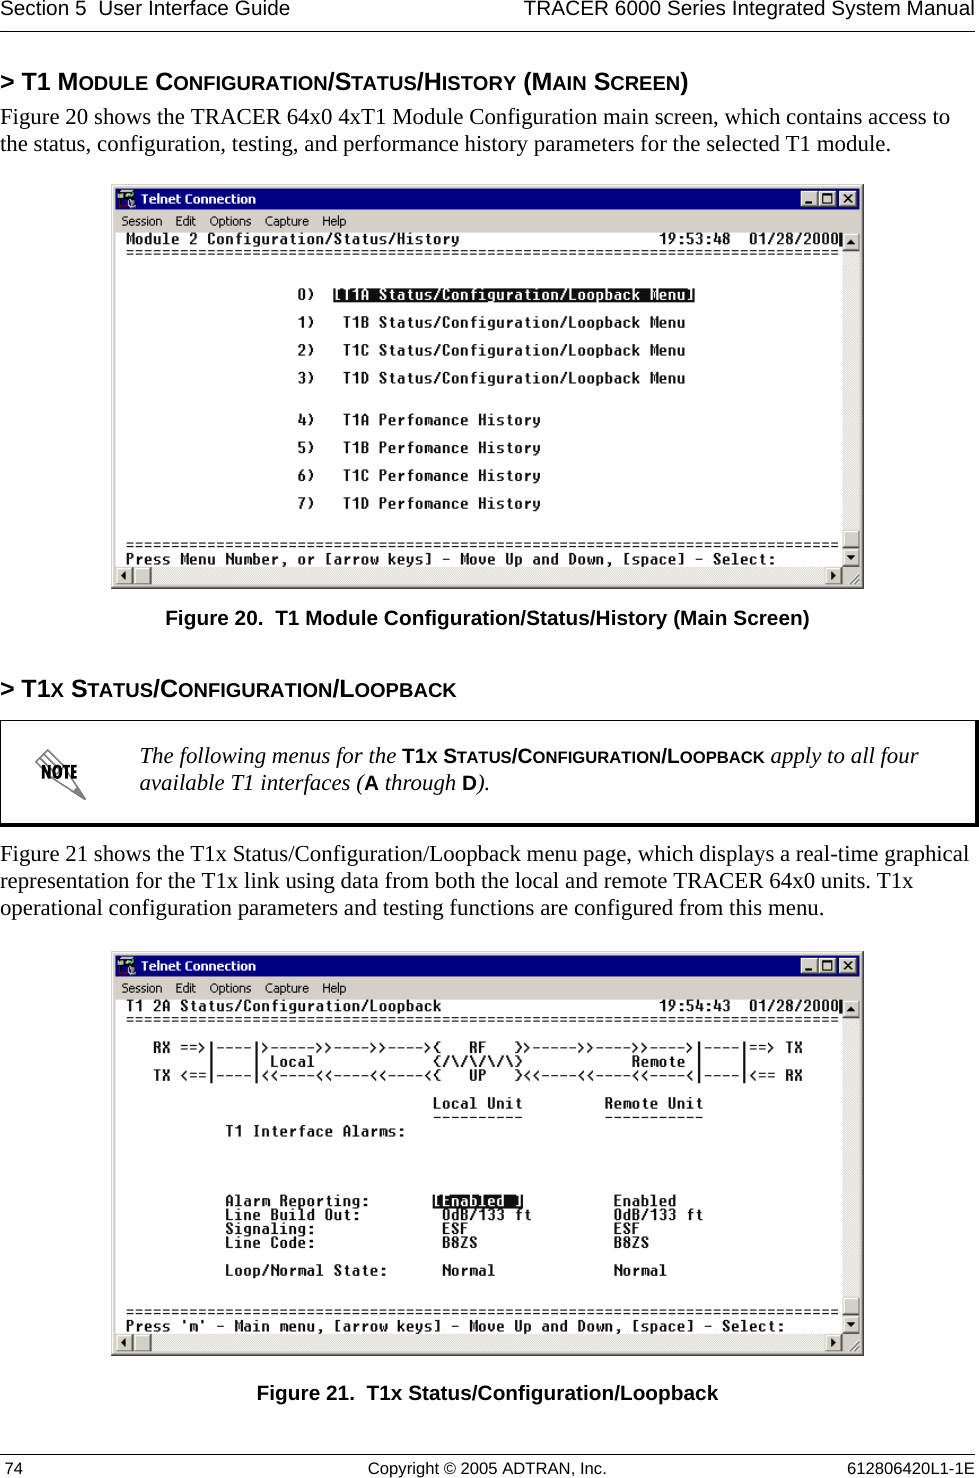 Section 5  User Interface Guide TRACER 6000 Series Integrated System Manual 74 Copyright © 2005 ADTRAN, Inc. 612806420L1-1E&gt; T1 MODULE CONFIGURATION/STATUS/HISTORY (MAIN SCREEN)Figure 20 shows the TRACER 64x0 4xT1 Module Configuration main screen, which contains access to the status, configuration, testing, and performance history parameters for the selected T1 module.Figure 20.  T1 Module Configuration/Status/History (Main Screen)&gt; T1X STATUS/CONFIGURATION/LOOPBACKFigure 21 shows the T1x Status/Configuration/Loopback menu page, which displays a real-time graphical representation for the T1x link using data from both the local and remote TRACER 64x0 units. T1x operational configuration parameters and testing functions are configured from this menu.Figure 21.  T1x Status/Configuration/LoopbackThe following menus for the T1X STATUS/CONFIGURATION/LOOPBACK apply to all four available T1 interfaces (A through D).